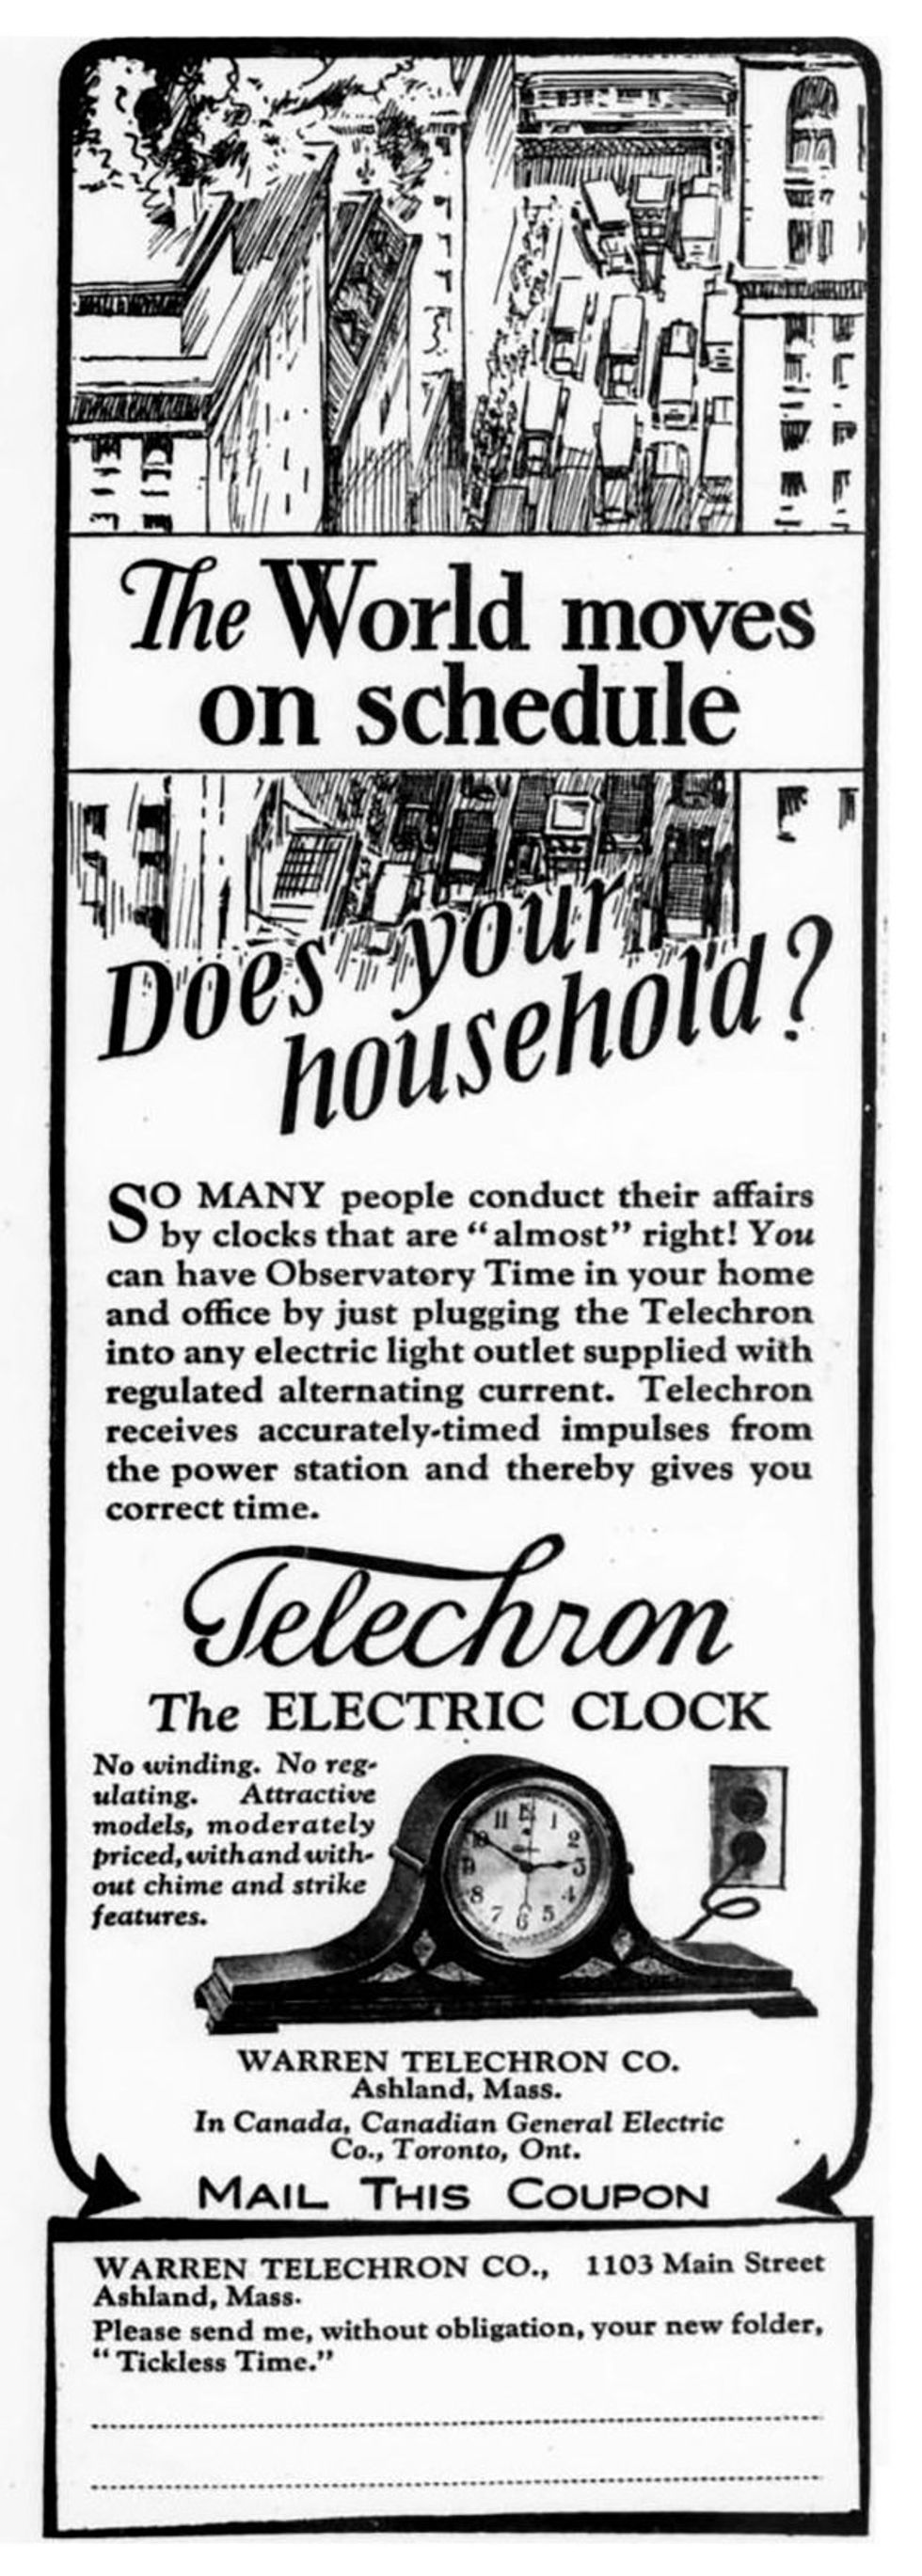 Image of an old magazine ad for an electric clock.